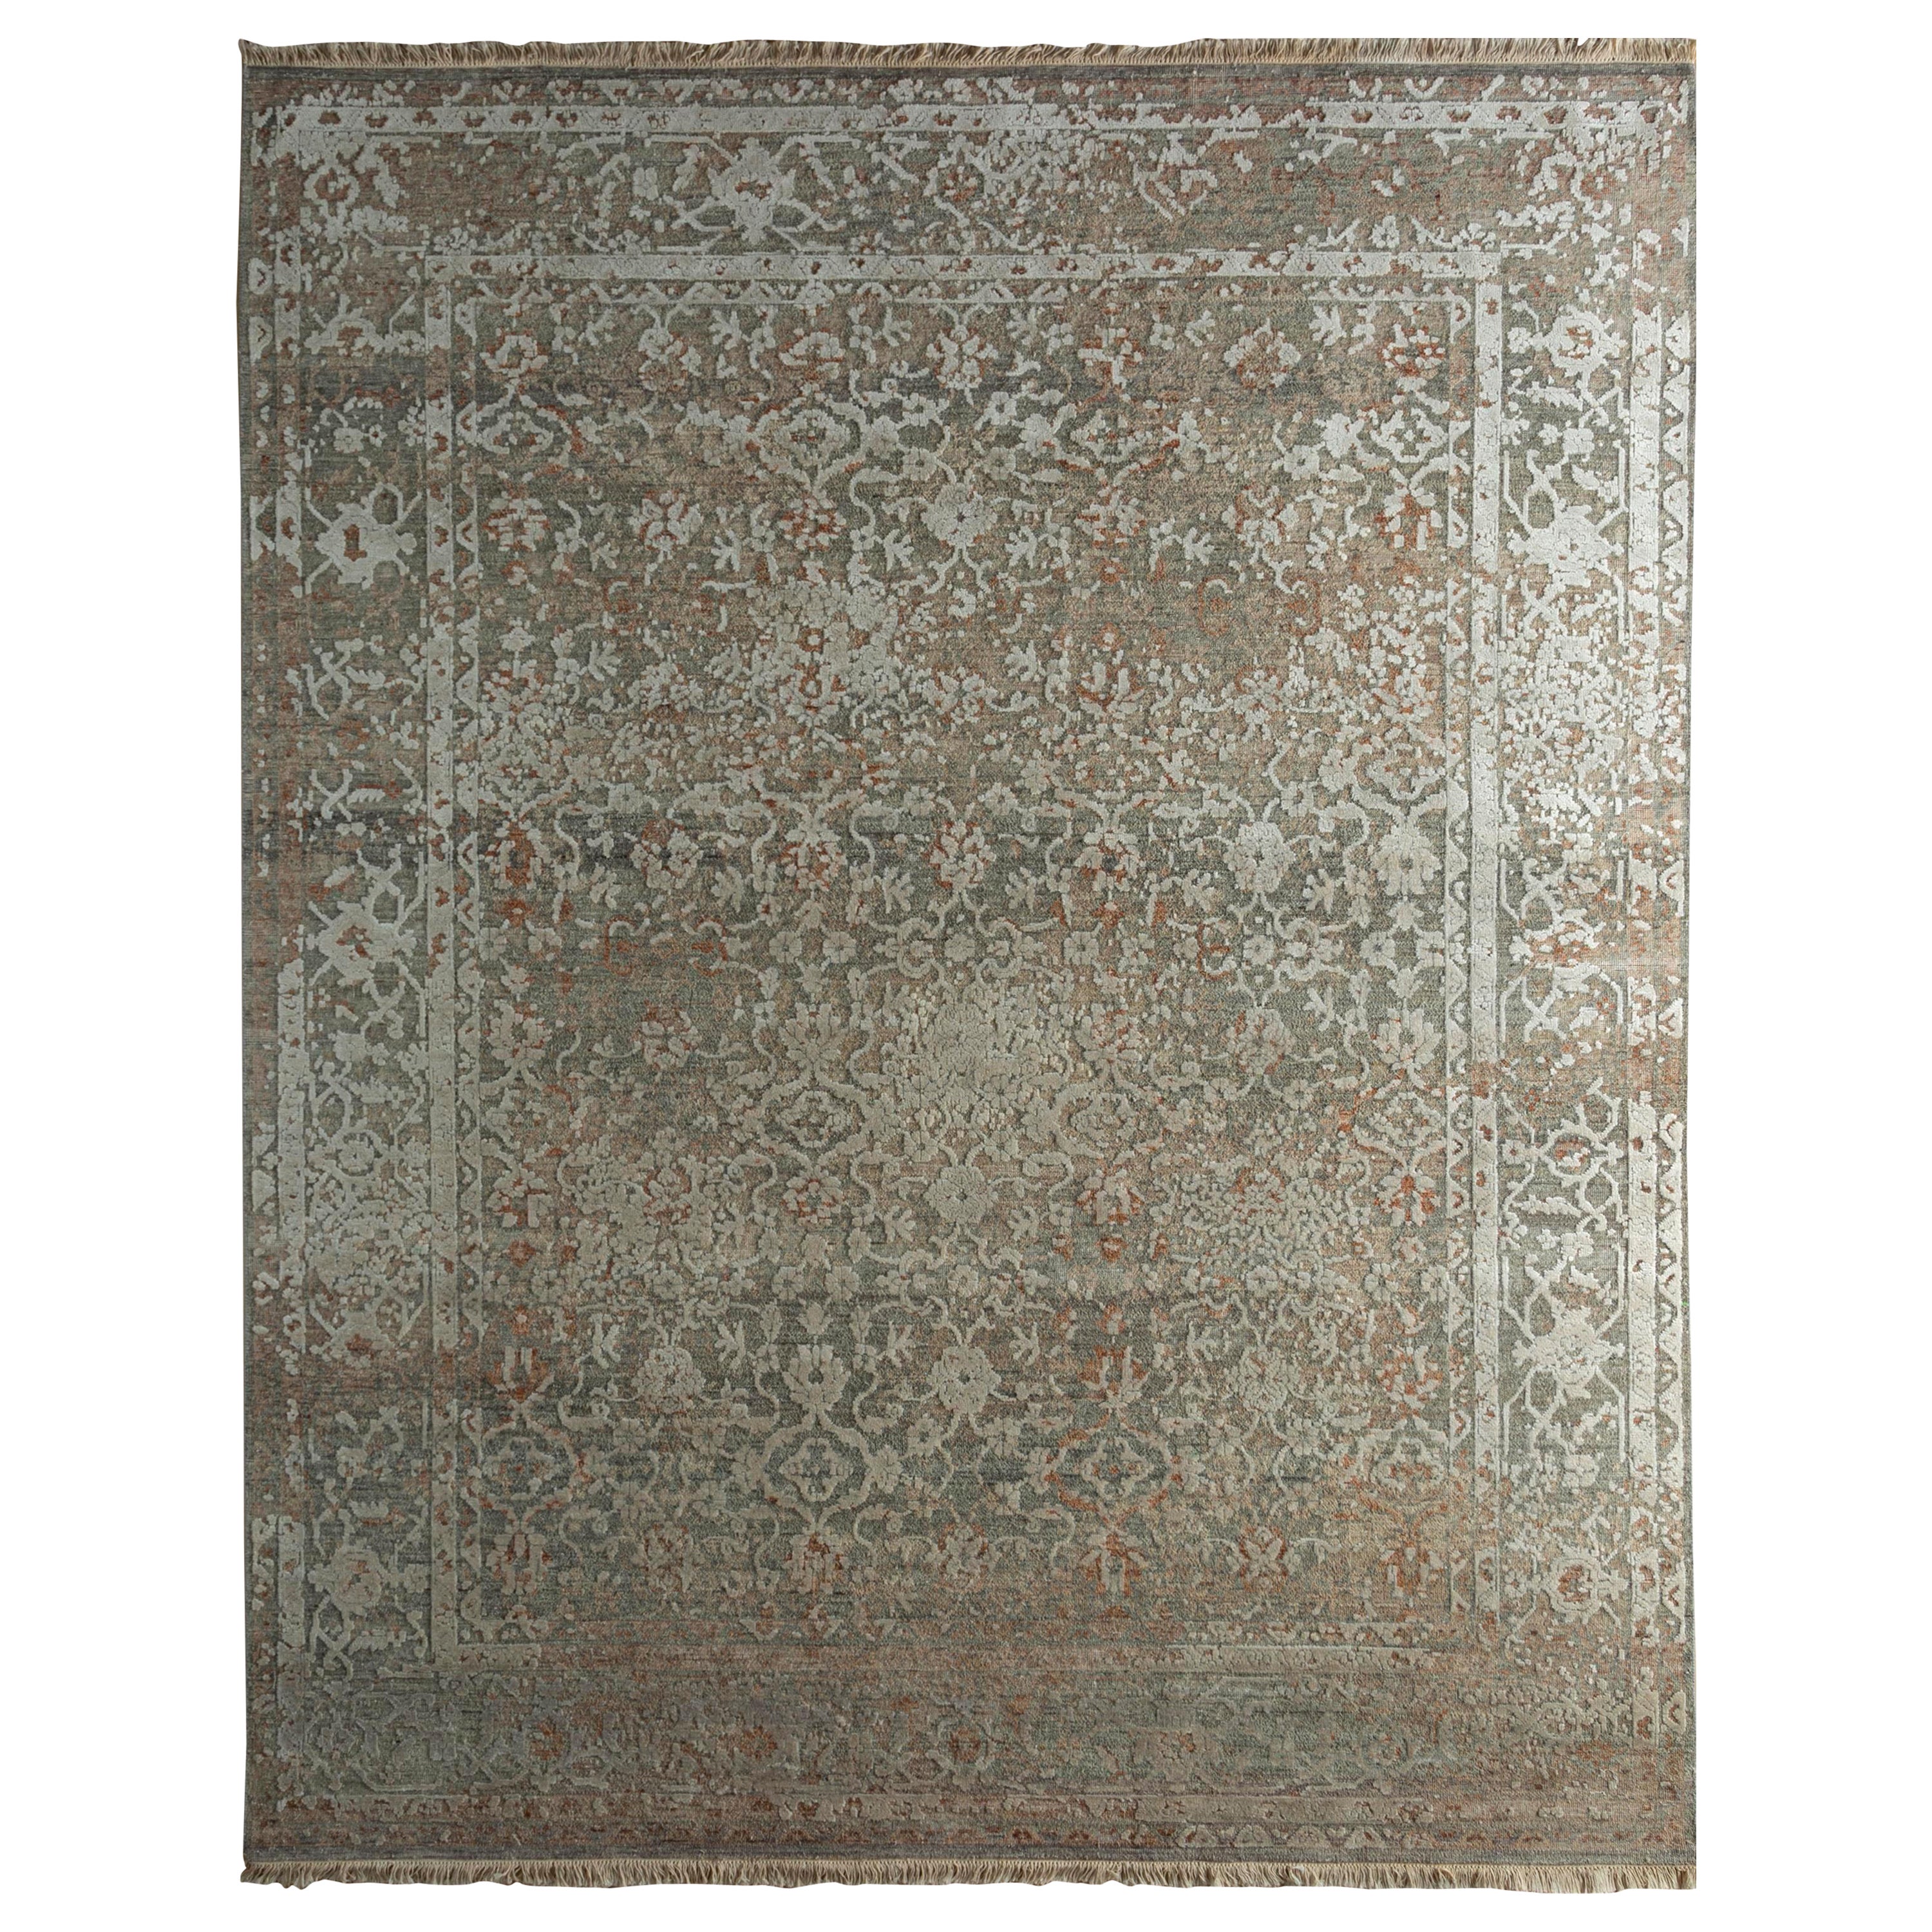 Ethereal Elegance Medium Taupe & Flax 240X300 Cm Handknotted Rug